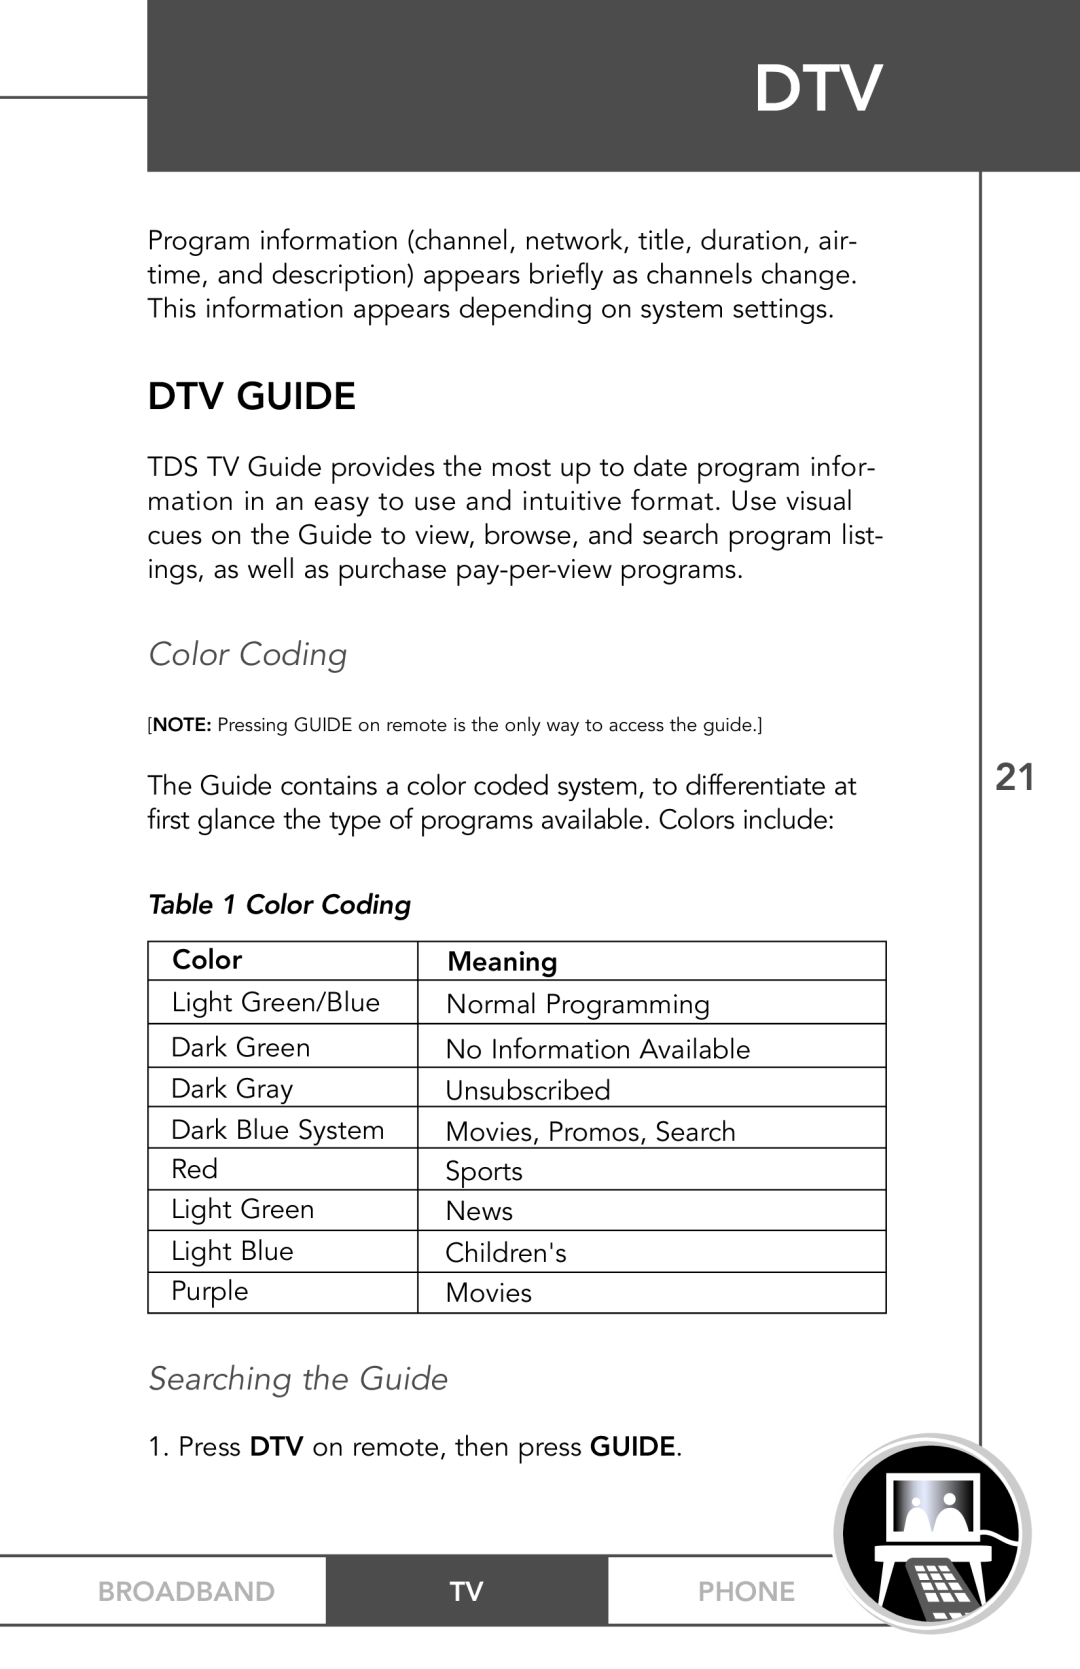 TV Guide On Screen PHONEBROADBAND TV manual Dtv Guide, Color Coding, Searching the Guide, Broadband, Phone 